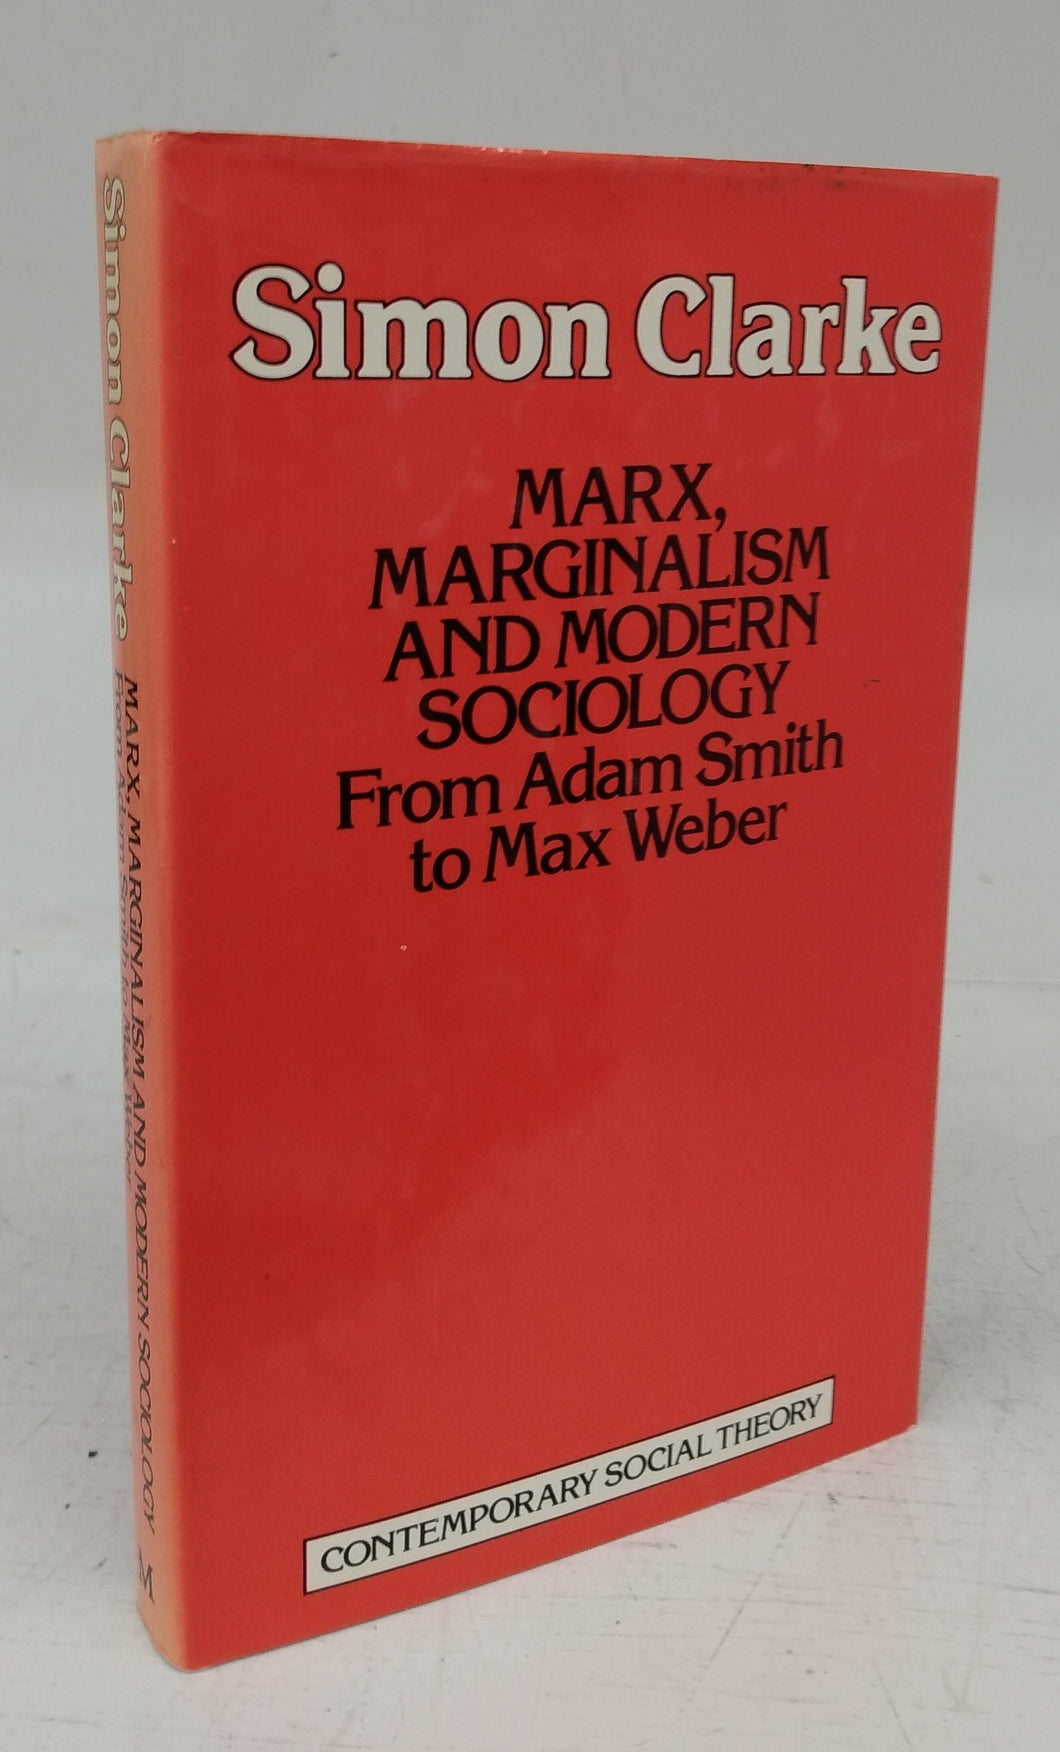 Marx, Marginalism and Modern Sociology From Adam Smith to Max Weber